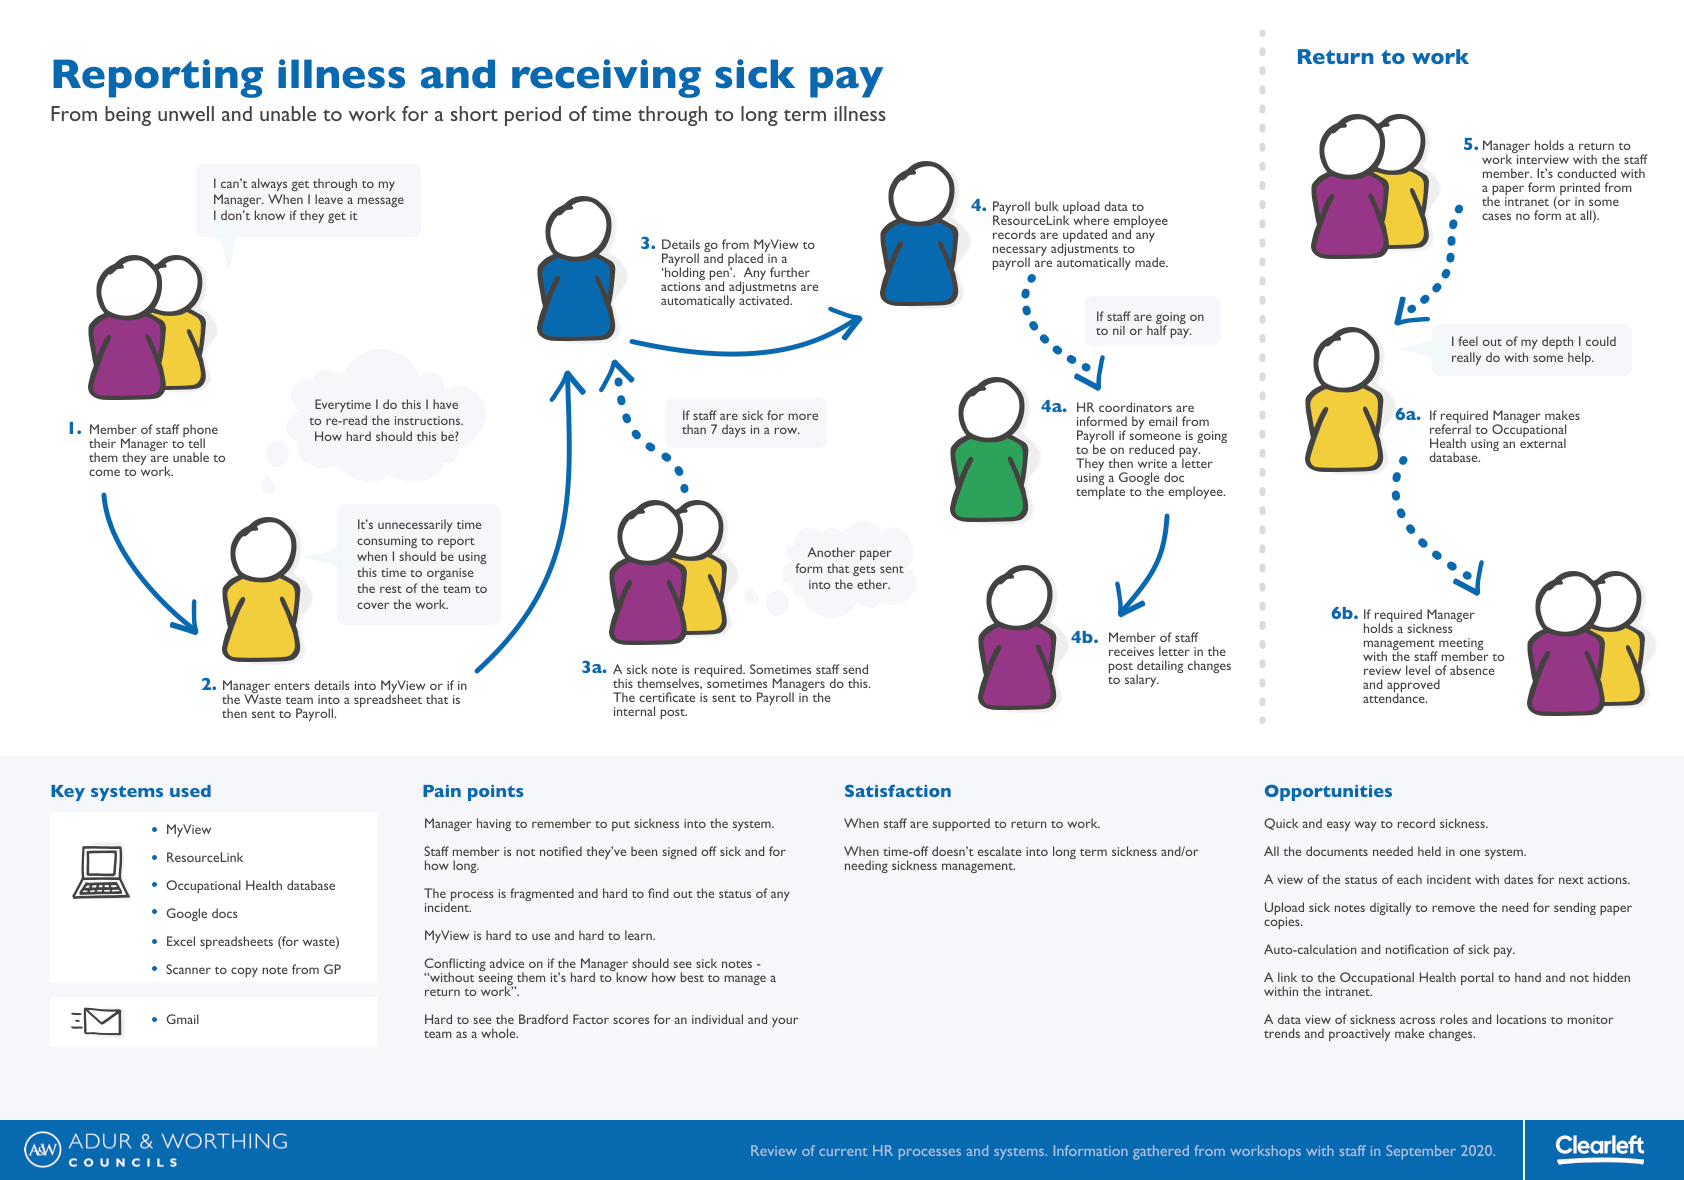 A friendly-looking diagram showing the current 10-step process for reporting illness and receiving sick pay